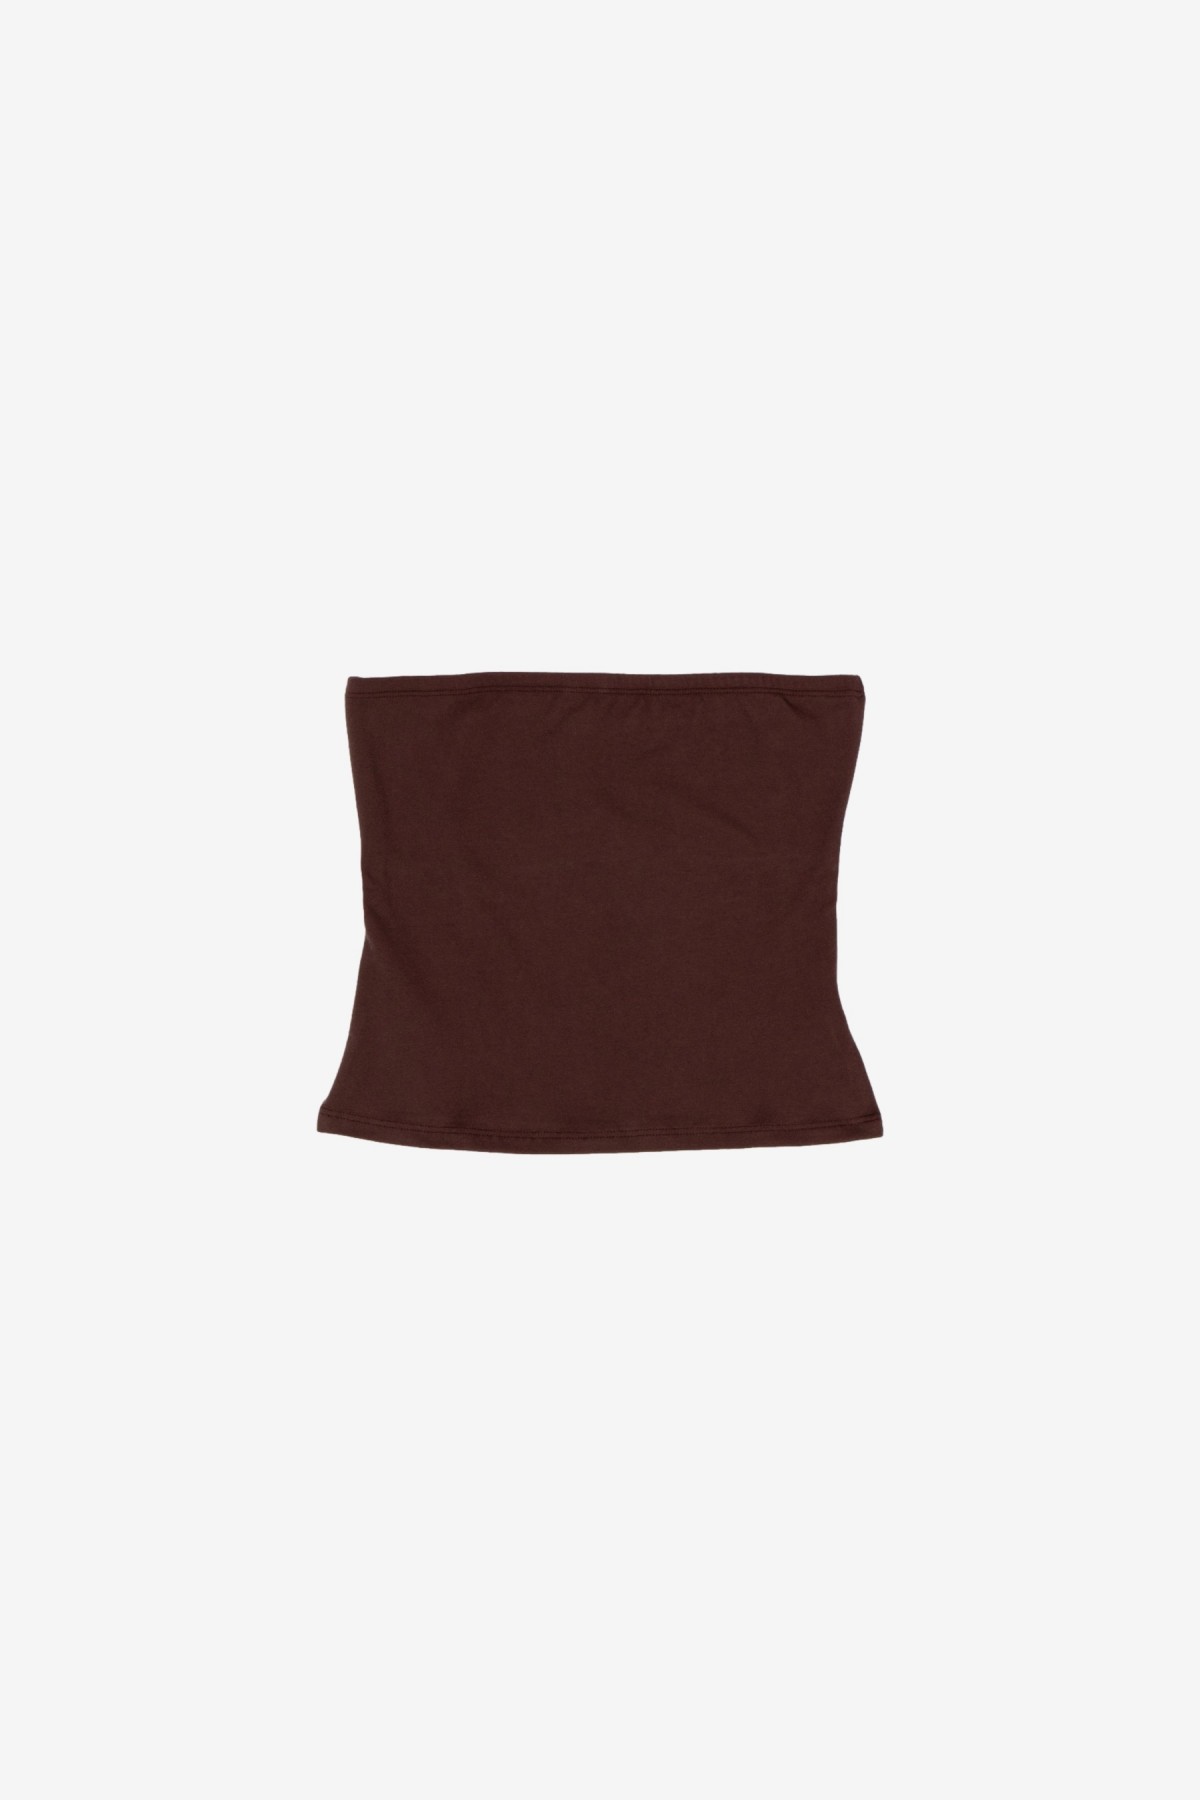 Gil Rodriguez The Tube Convertible Top in Chocolate